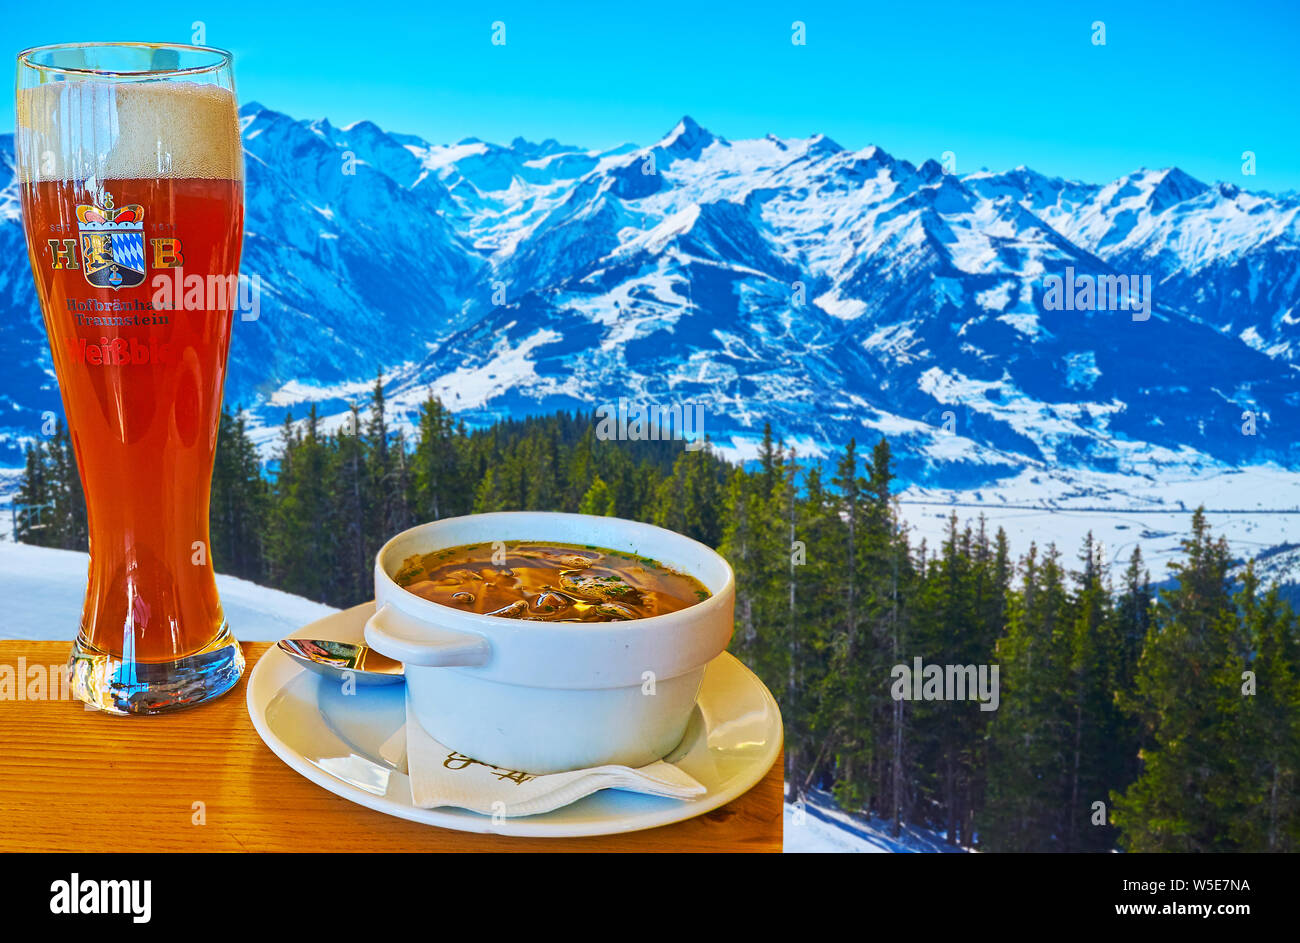 ZELL AM SEE, AUSTRIA - FEBRUARY 28, 2019: Enjoy the dinner with sliced pancake soup and beer in cafe, located on Schmitten mountain slope and overlook Stock Photo